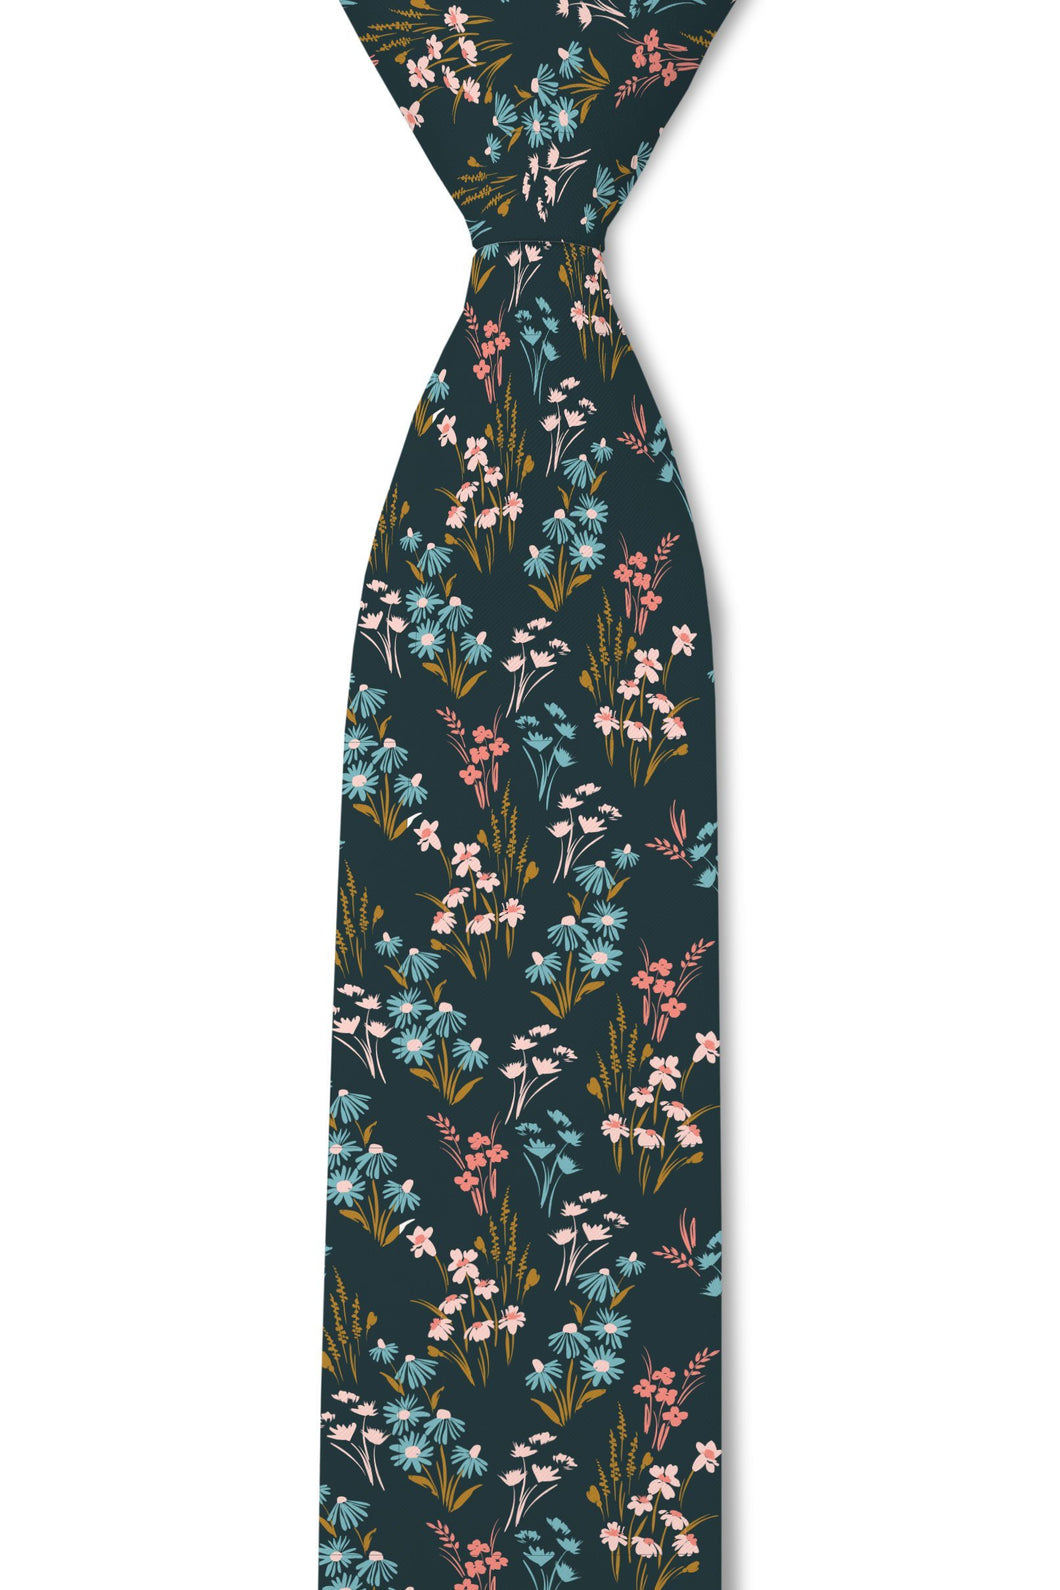 Willow missionary tie